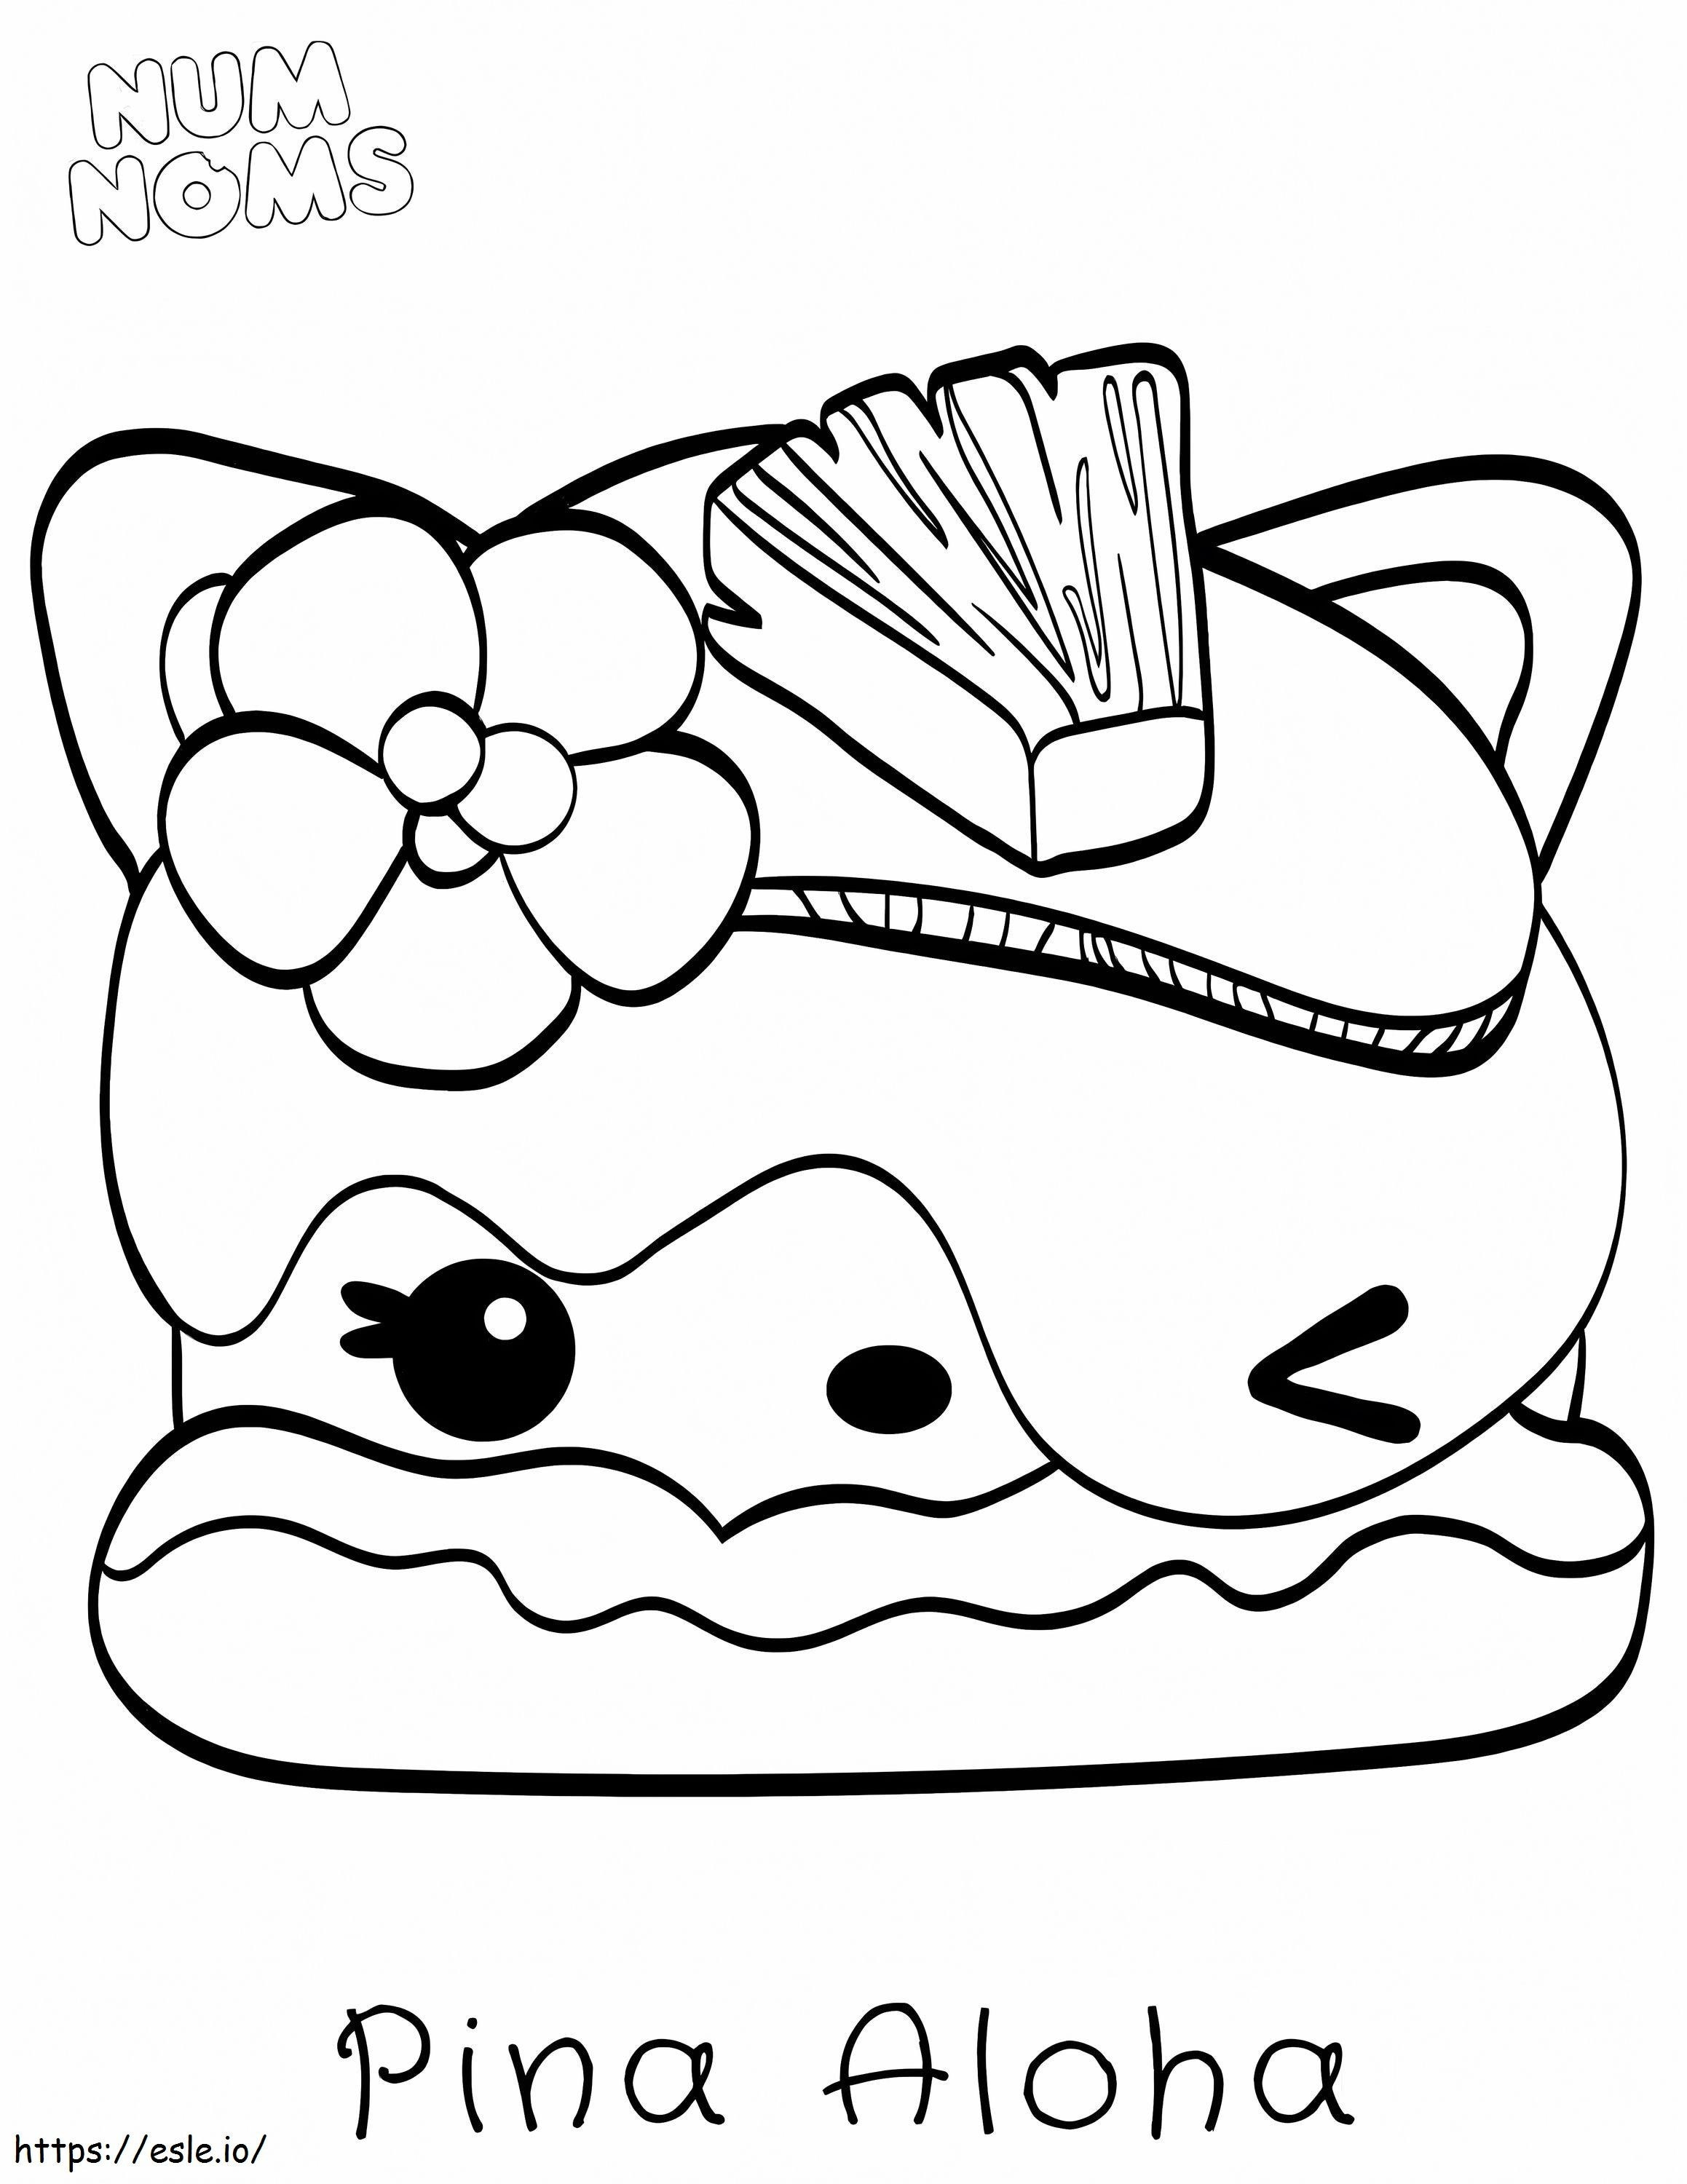 Pina Aloha In Num Noms coloring page